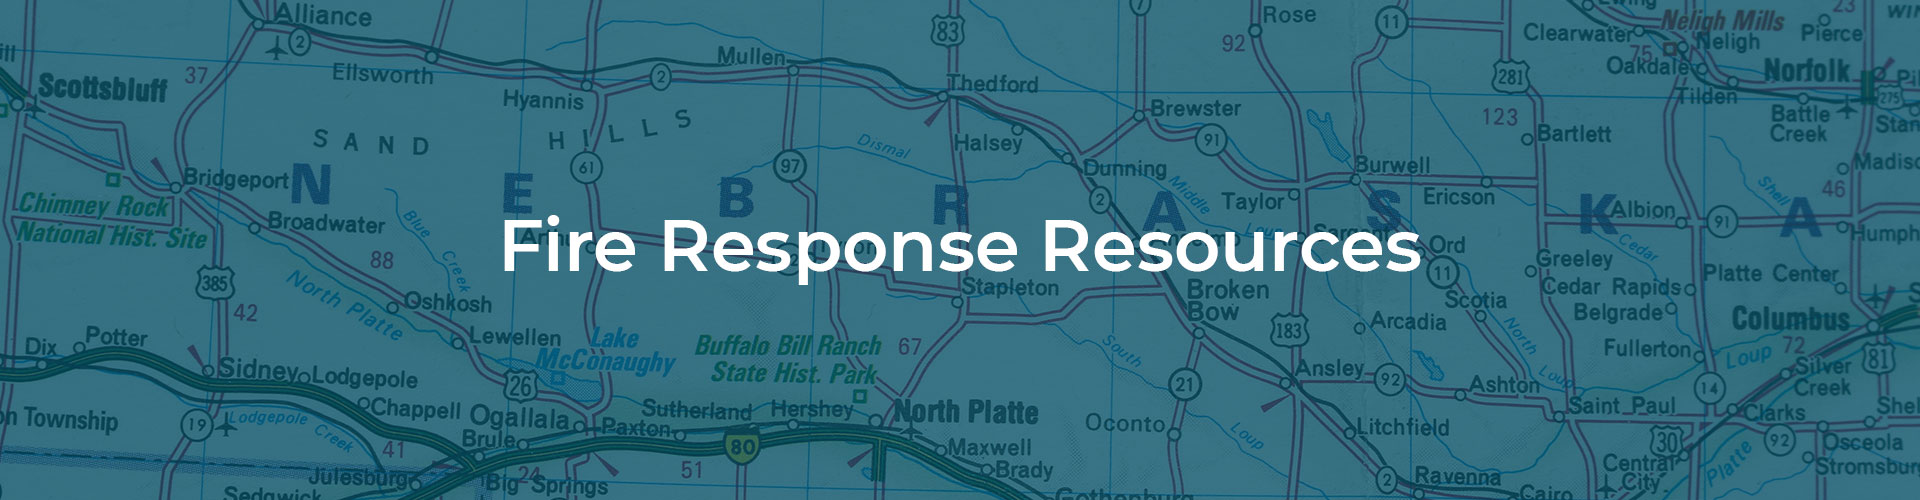 Full Width - Fire Response Resources